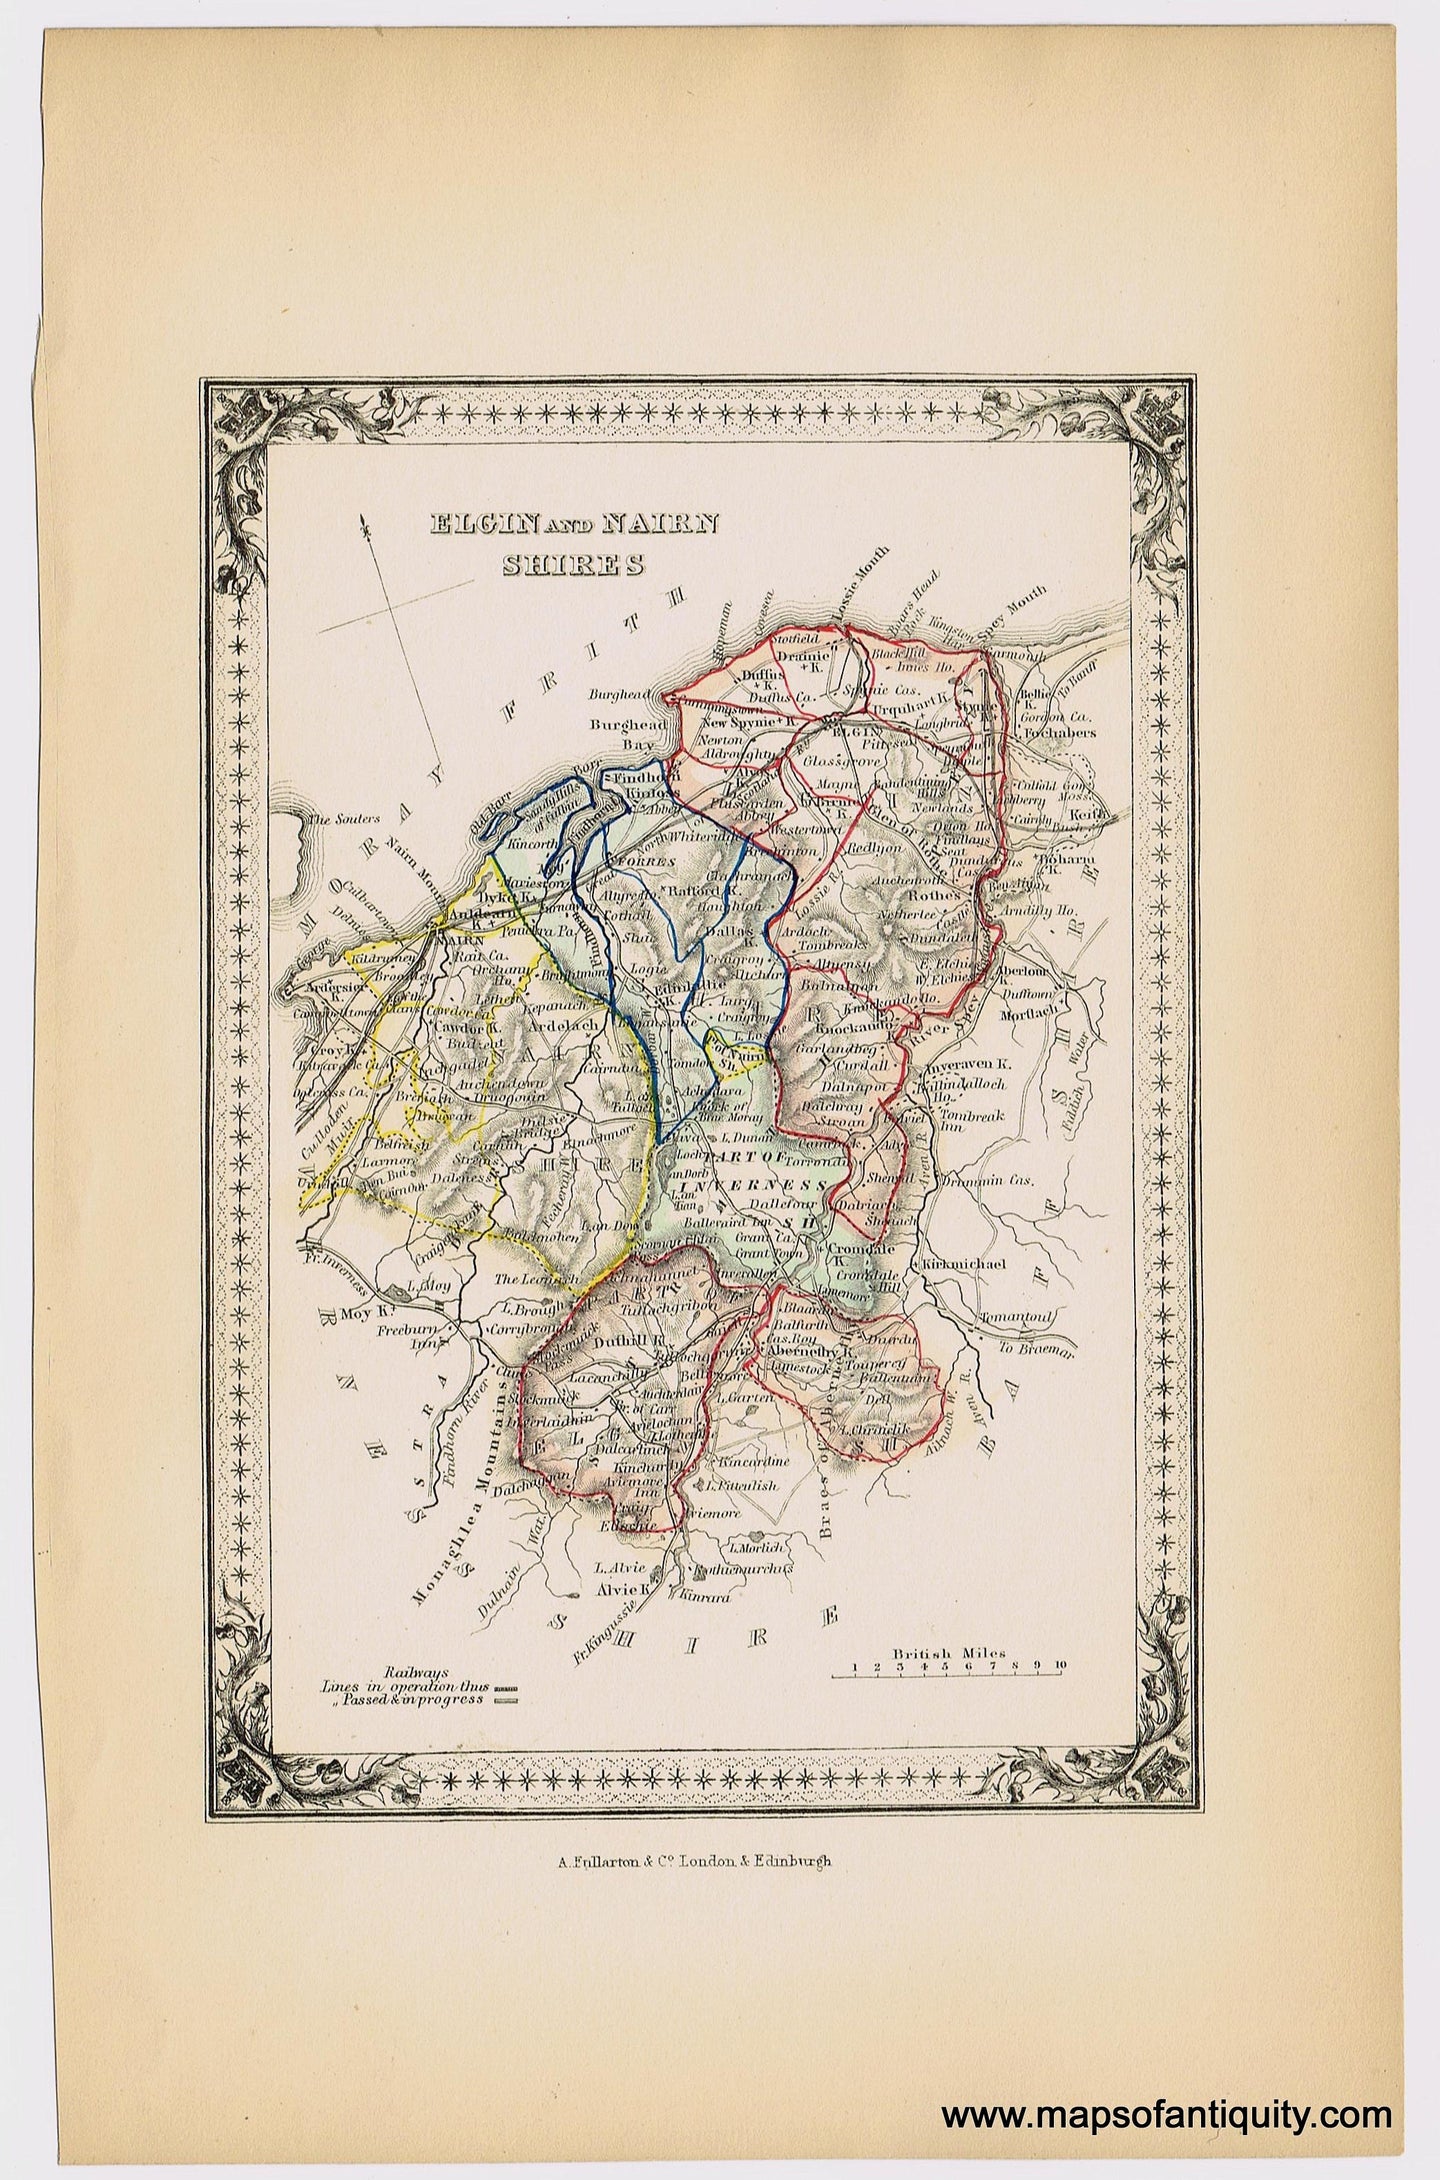 Genuine-Antique-Hand-colored-Map-Elgin-and-Nairn-Shires-Scotland--1855-A-Fullarton-Co--Maps-Of-Antiquity